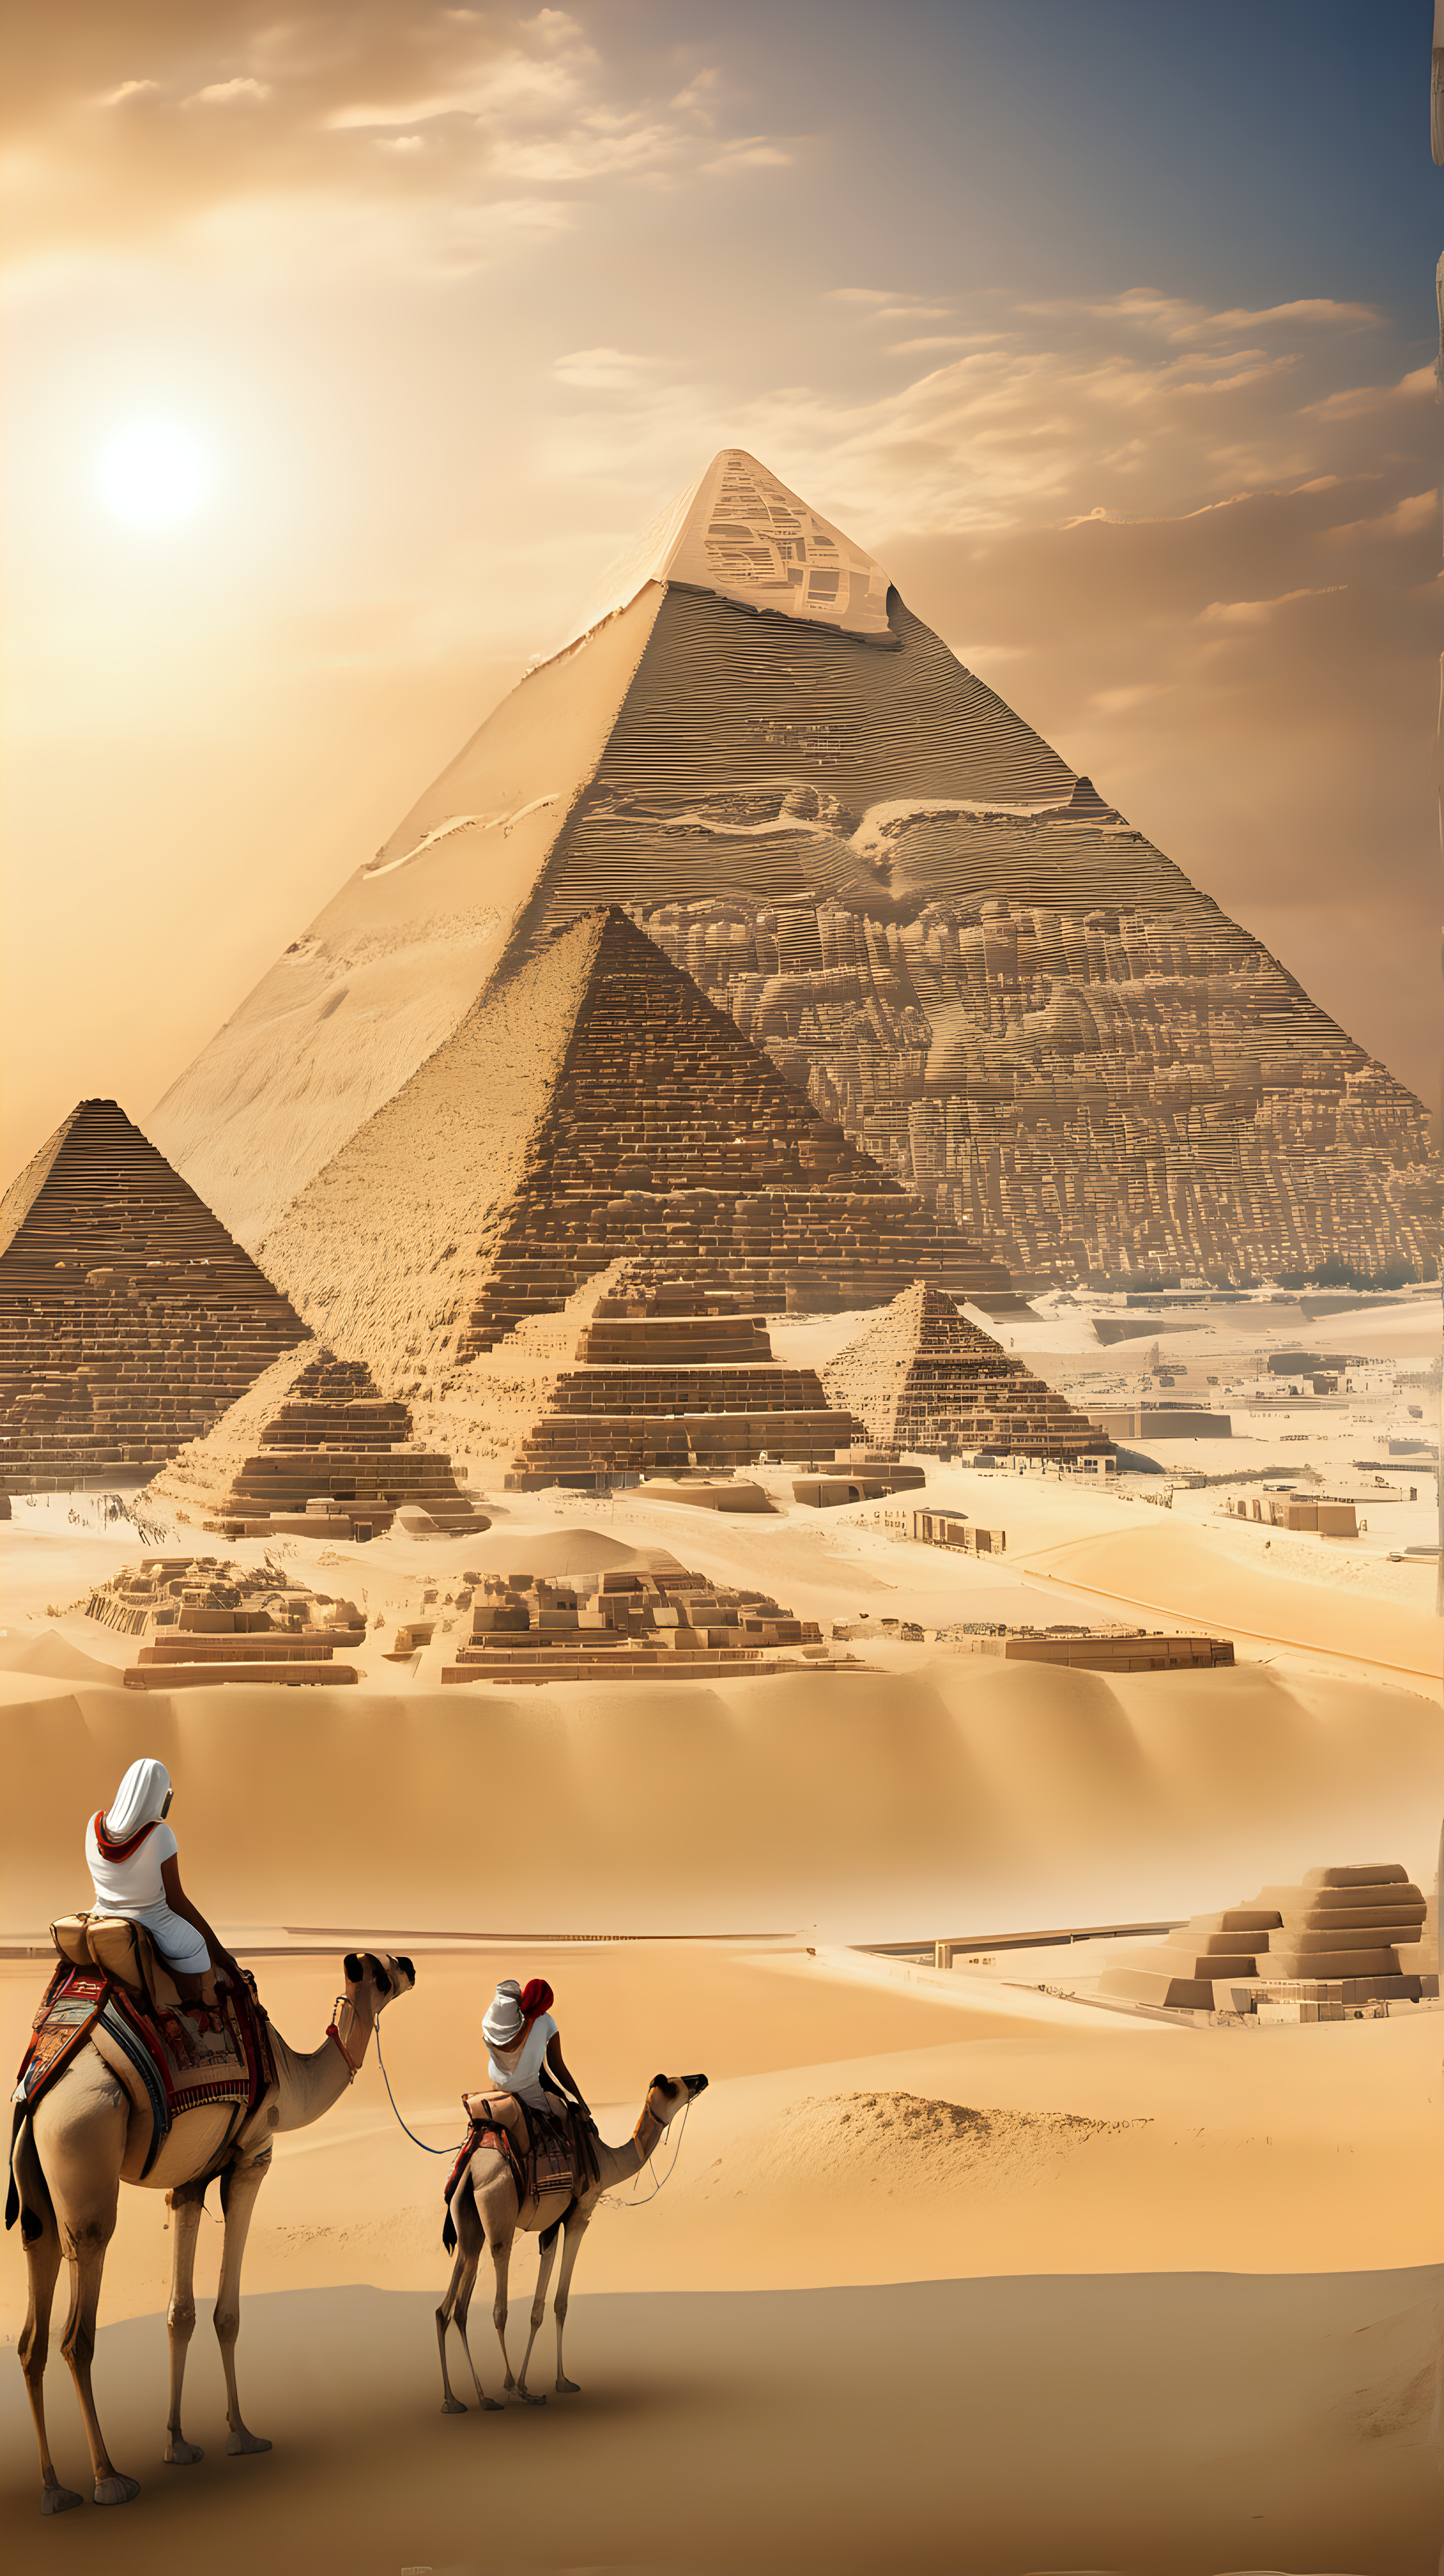 Imagine we're prompting, an enchanting trivia background featuring the majestic pyramids of Giza. Showcase the ancient wonders with intricate details using a high-quality camera model and lens. Illuminate the scene with balanced and natural lighting, creating a universally usable and visually stunning composition for an immersive geography trivia backdrop.